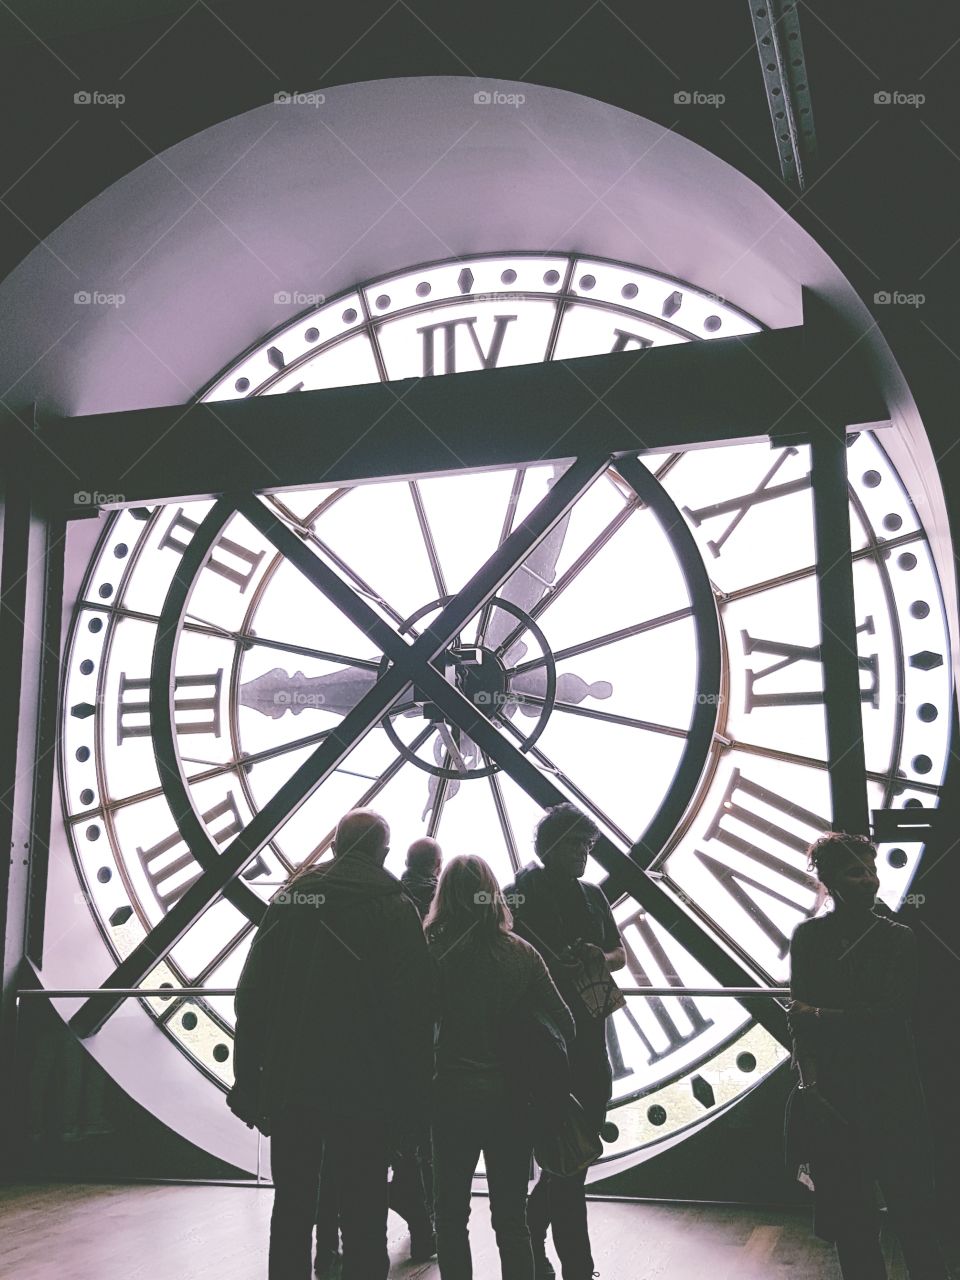 A time of gathering. A group of people look through the clock window